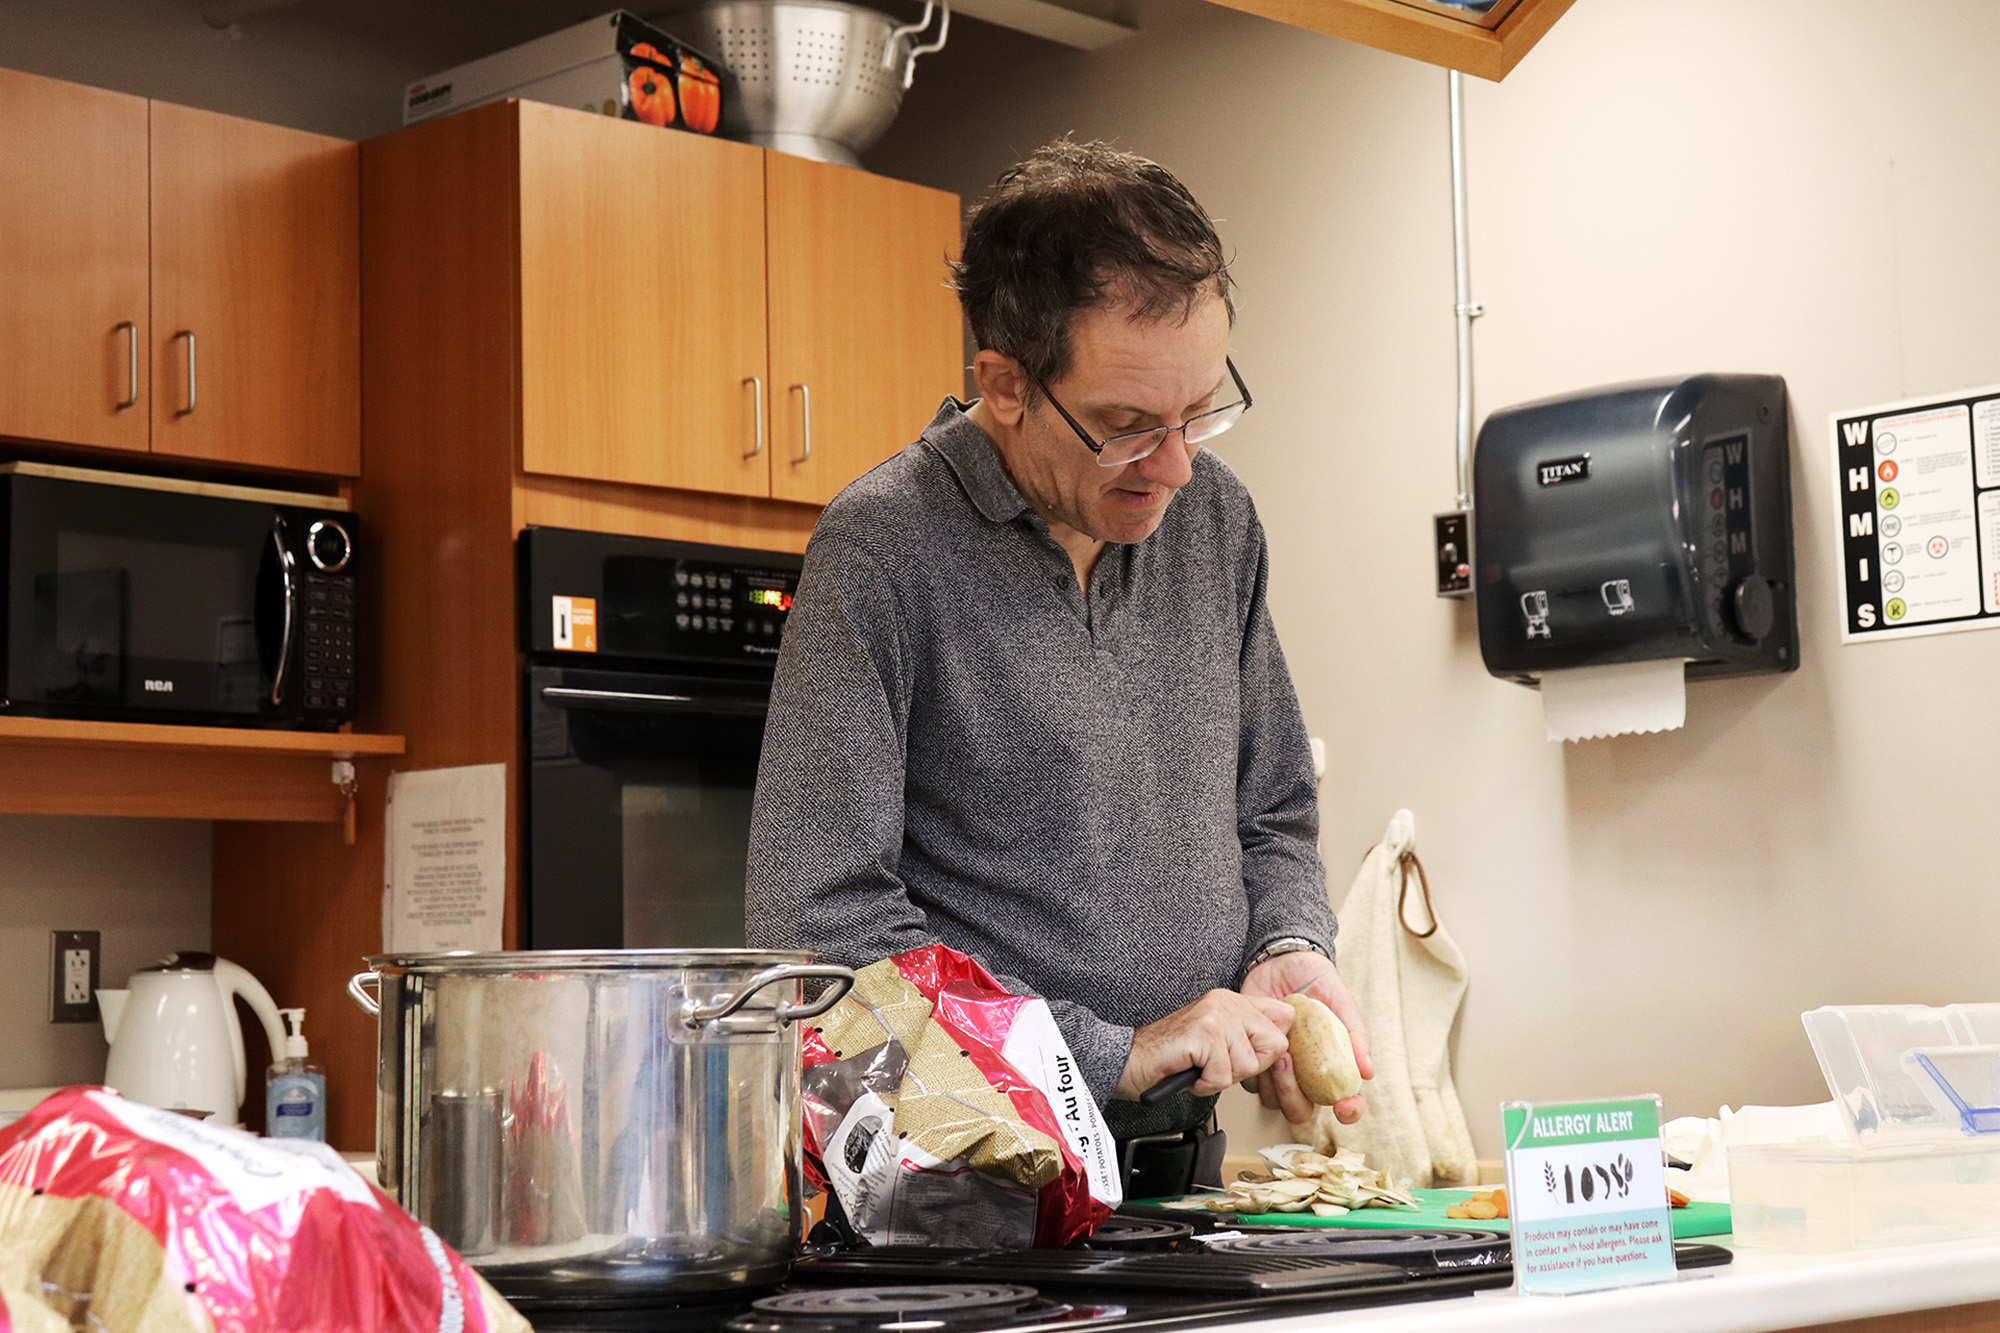 Daryl Mombourquette attended the cooking course for his partner.
